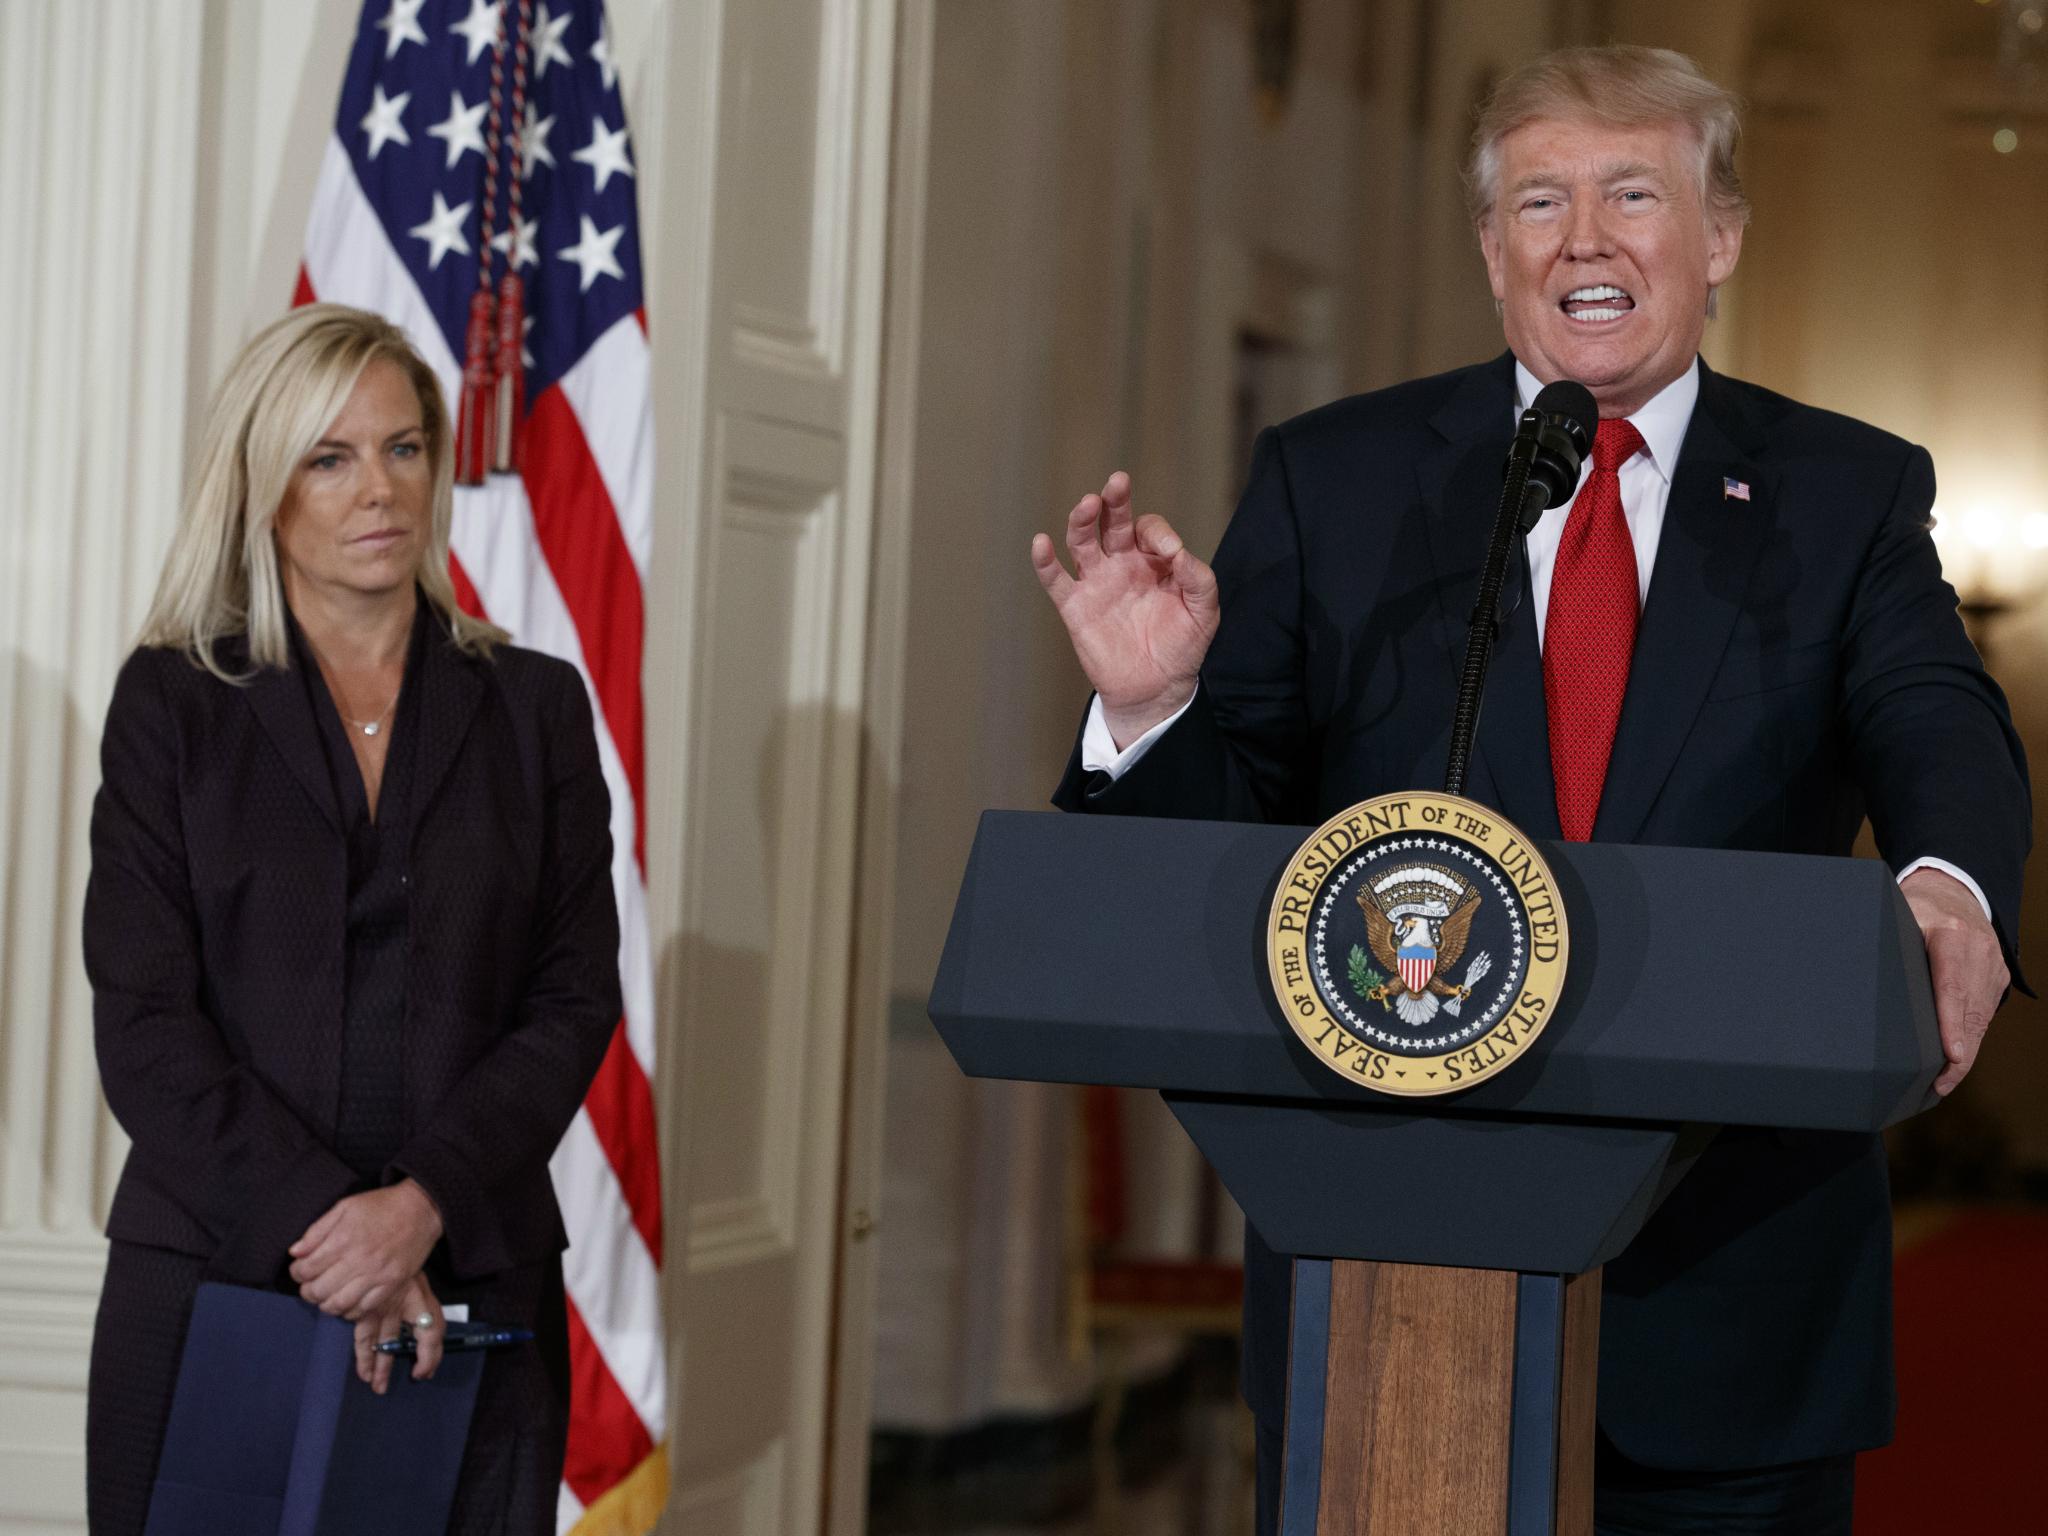 President Donald Trump speaks about nominating his deputy chief of staff, Kirstjen Nielsen, as his next secretary of Homeland Security on 12 October at the White House.